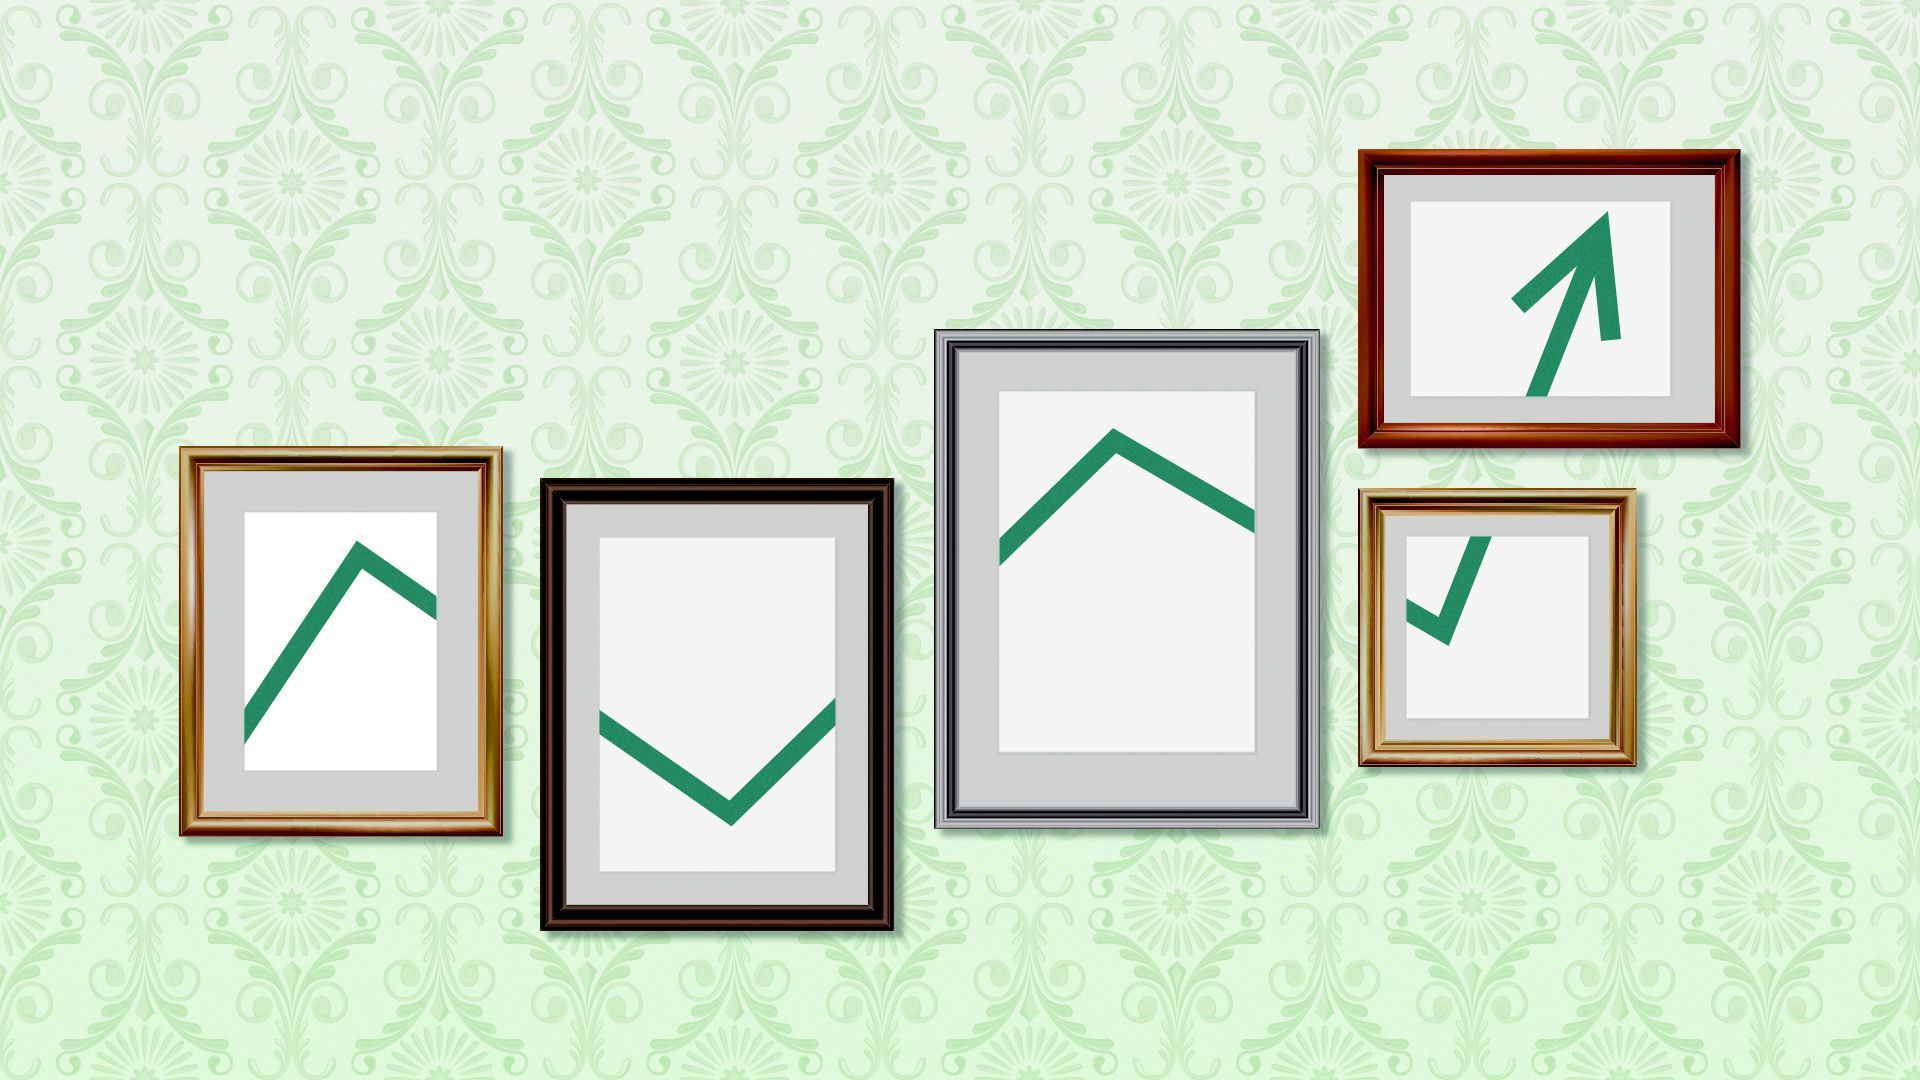 Illustration of a series of segments of an upward trending line in frames on a gallery wall.